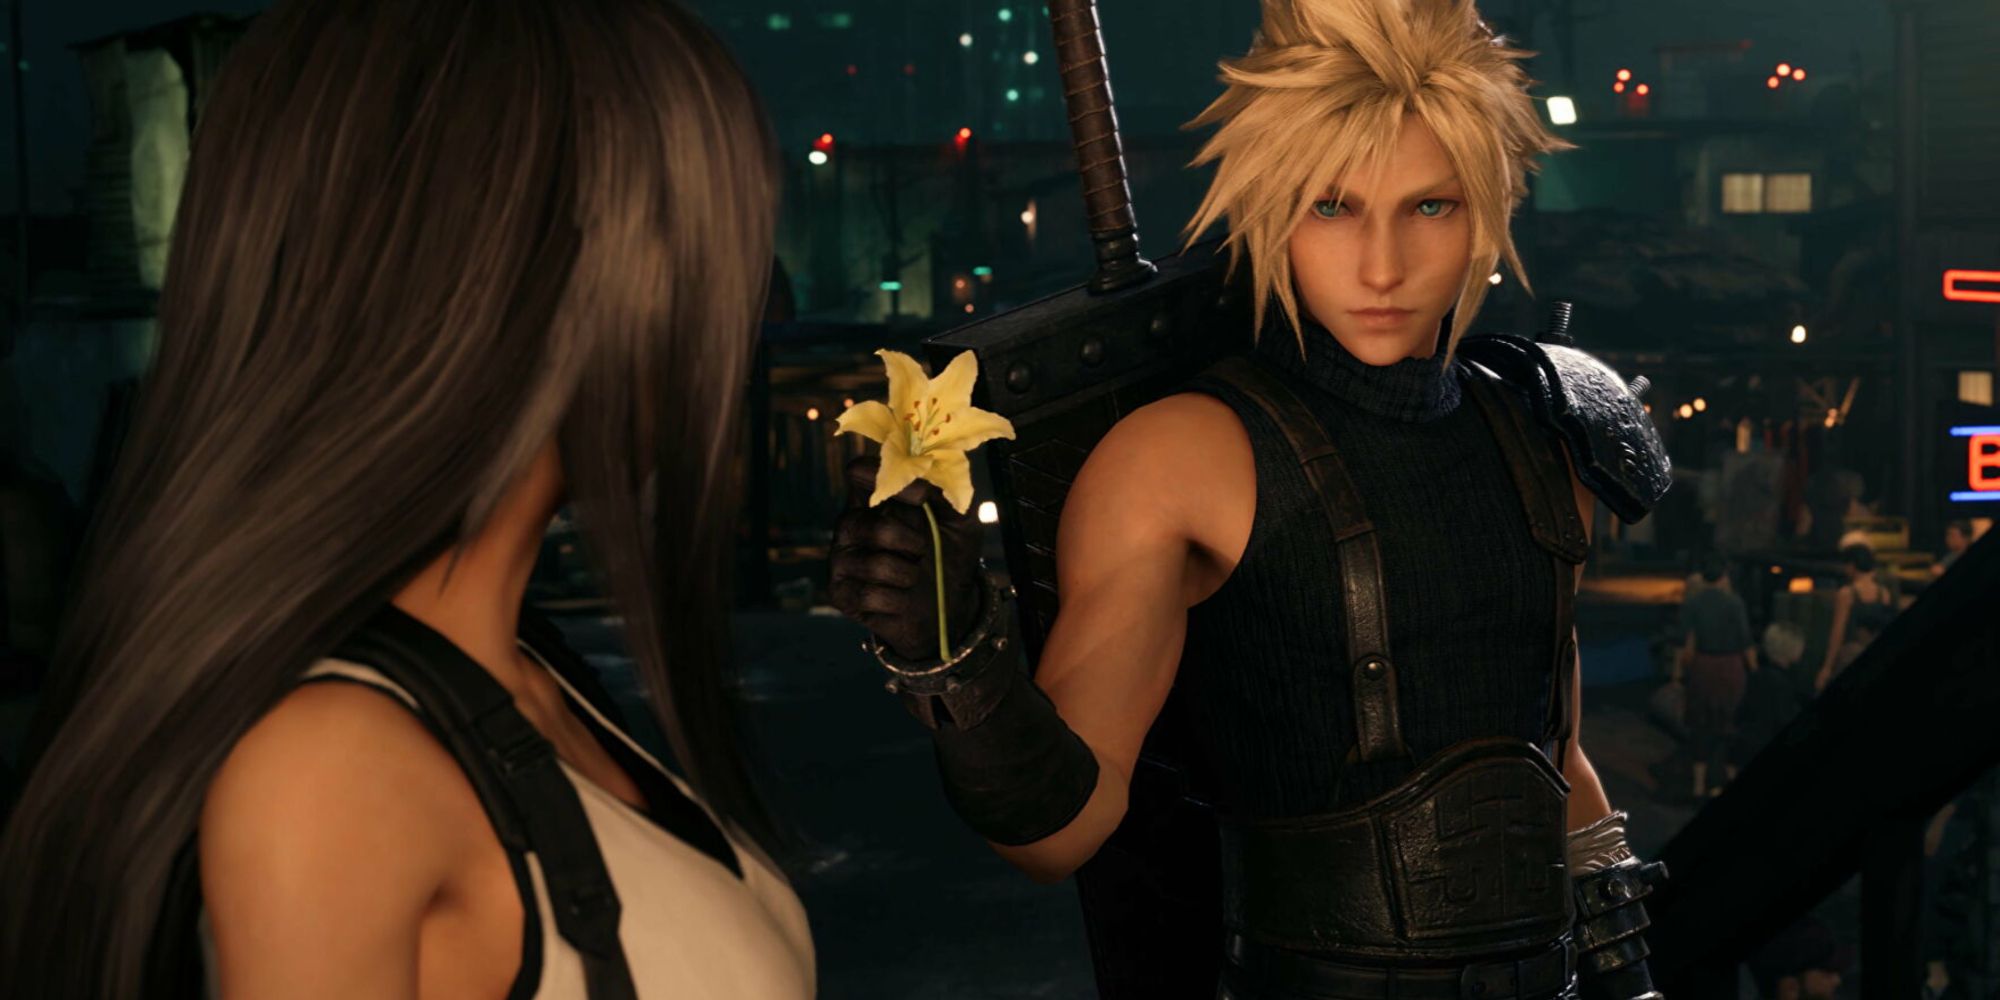 Cloud giving Tifa a yellow flower in Fina Fantasy 7 Remake